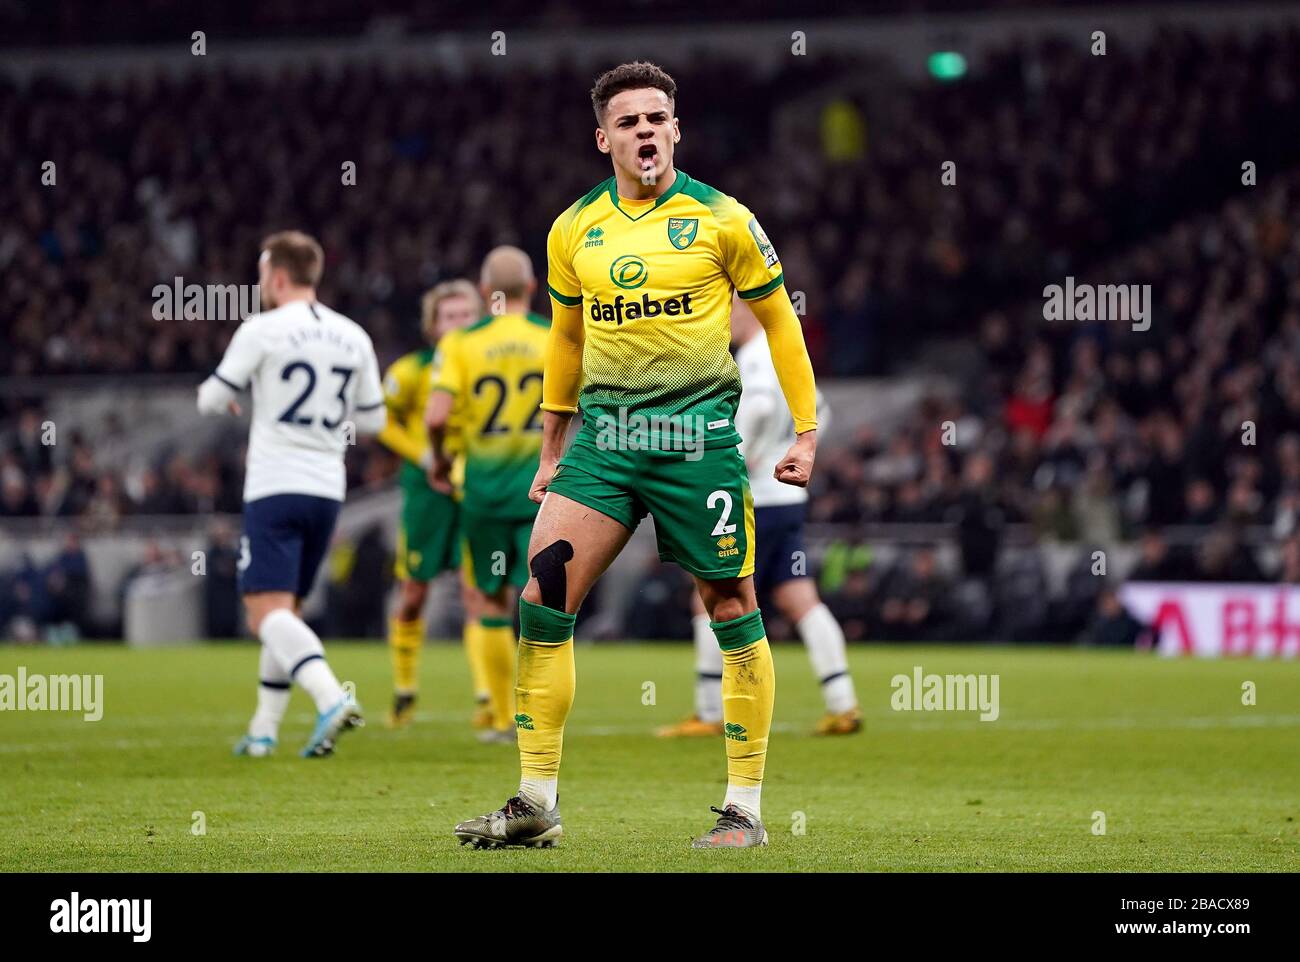 Norwich City's Max Aarons celebrates after he is awarded a penalty after being judged to have been fouled in the Tottenham Hotspur penalty area Stock Photo